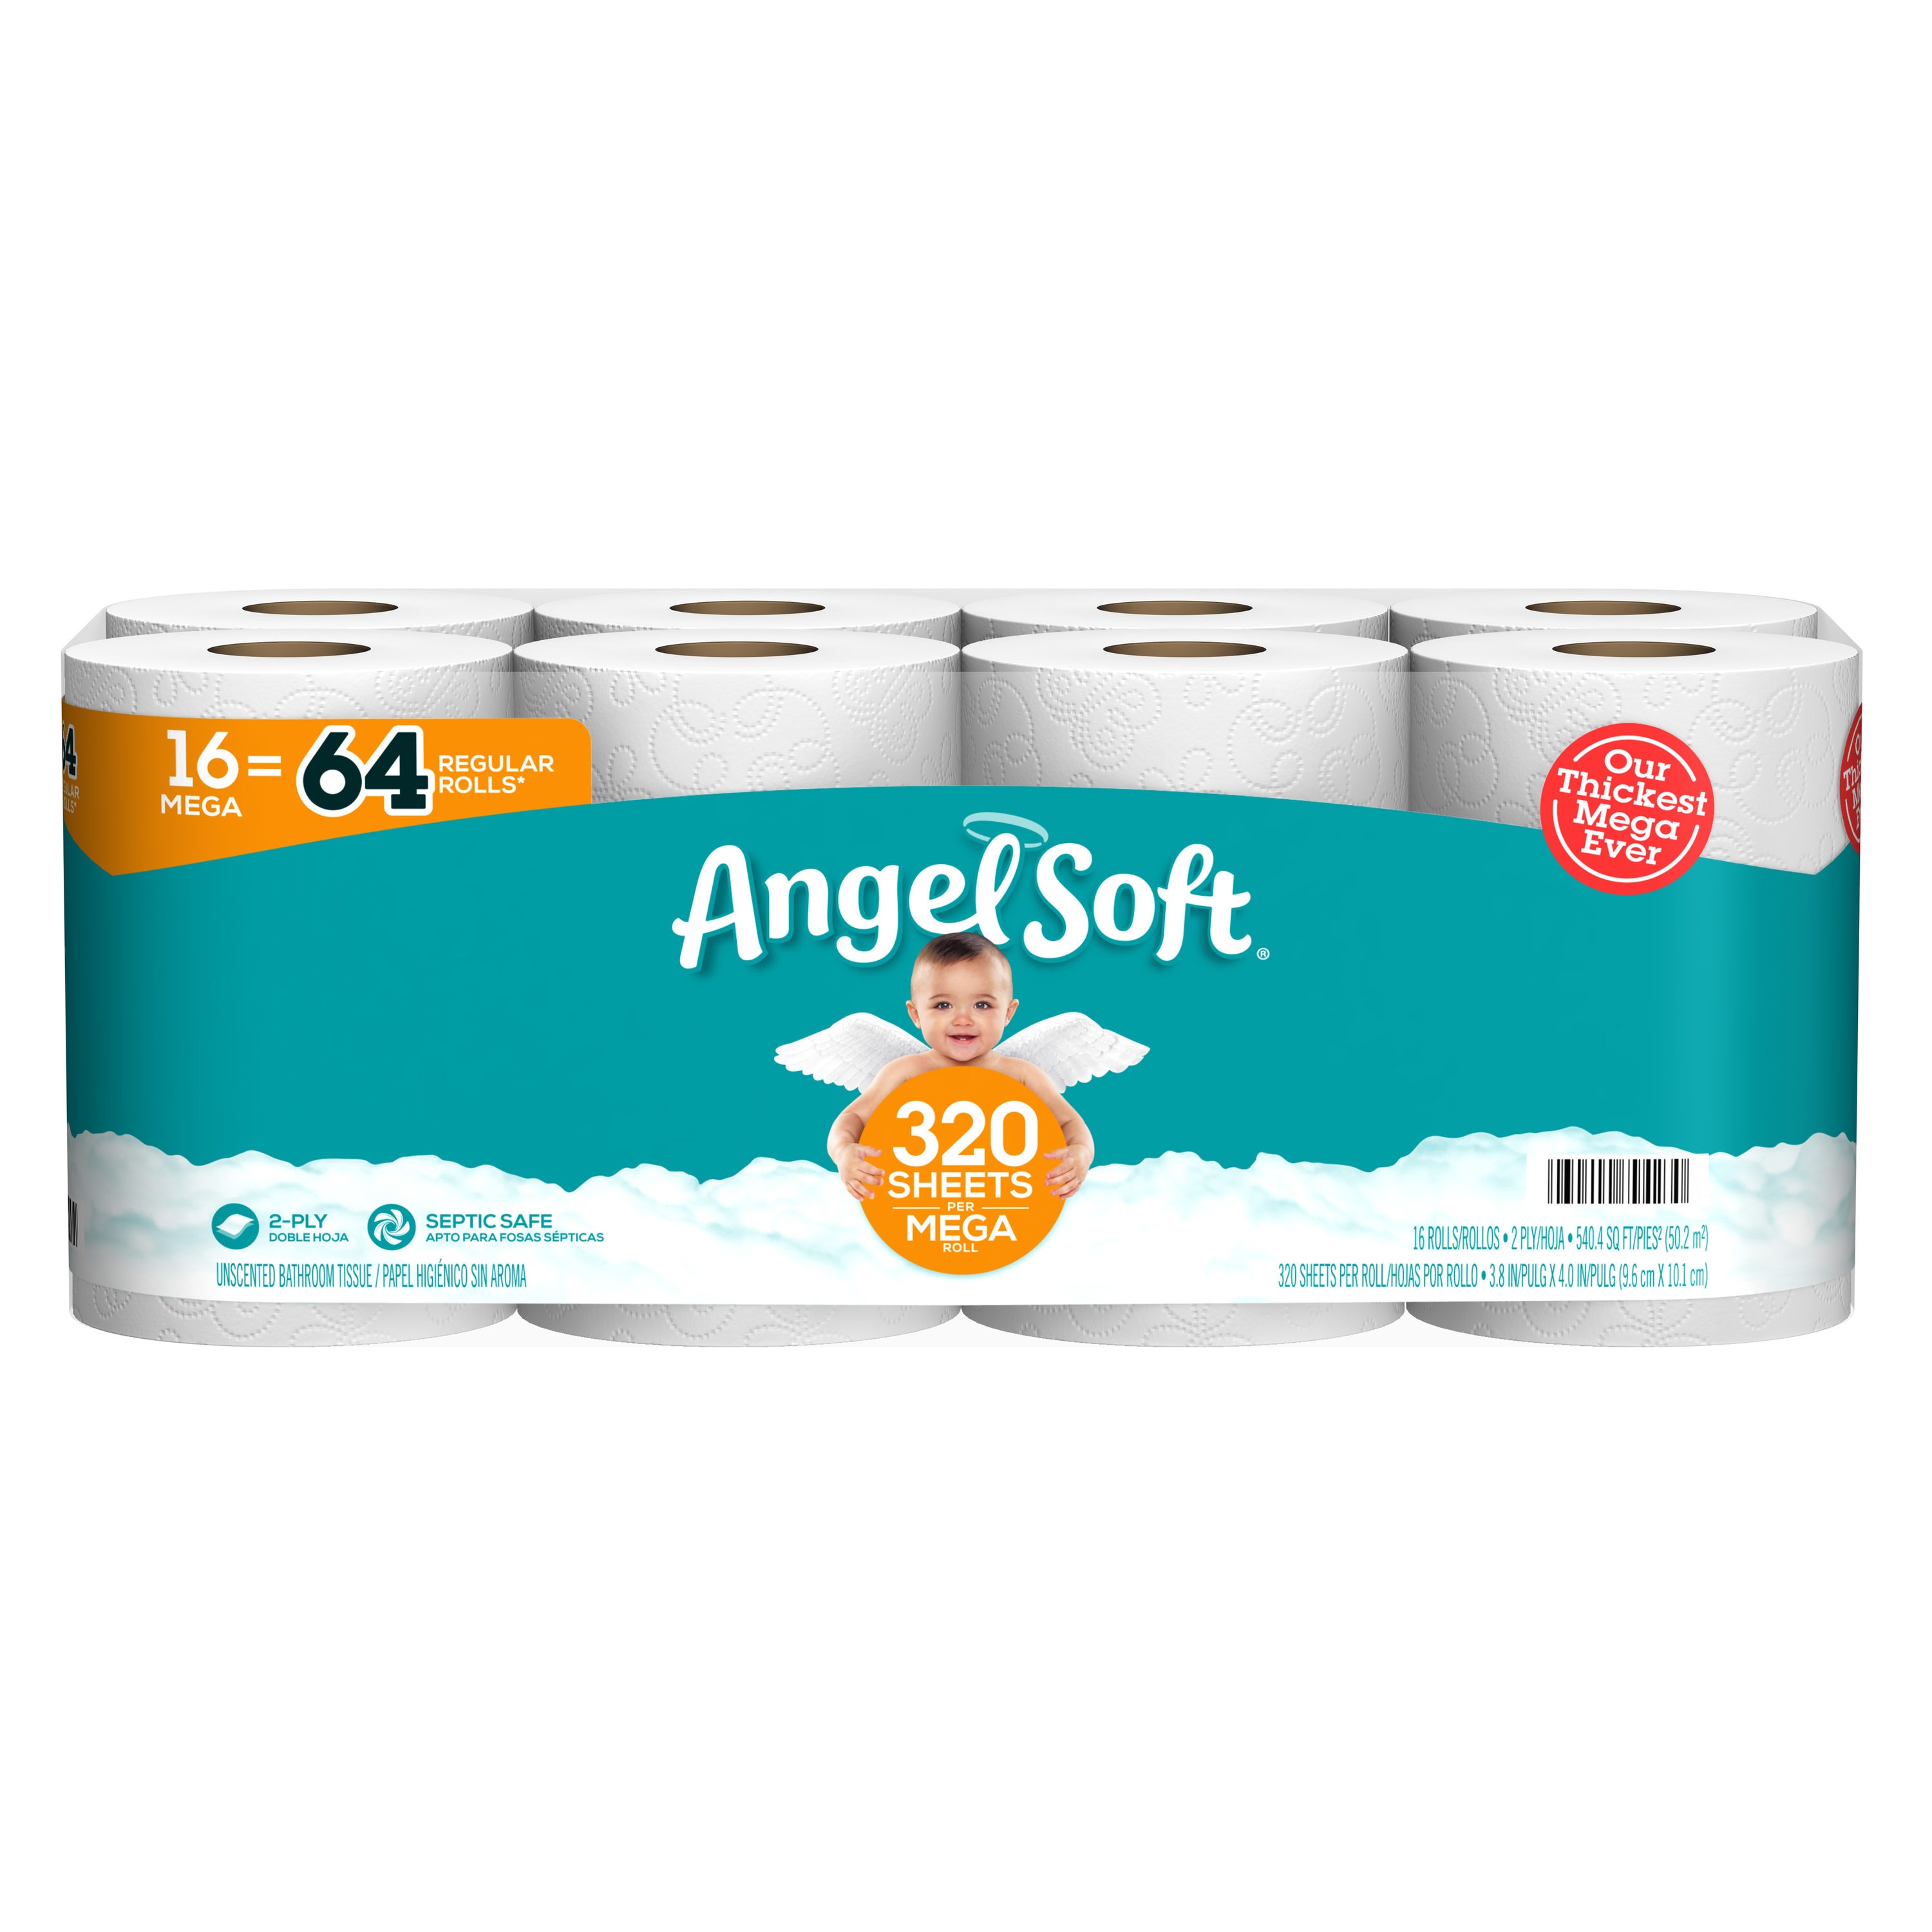 New Angel Soft 36 Huge Pack Featuring Long-Lasting Septic & Sewer Safe Toilet 